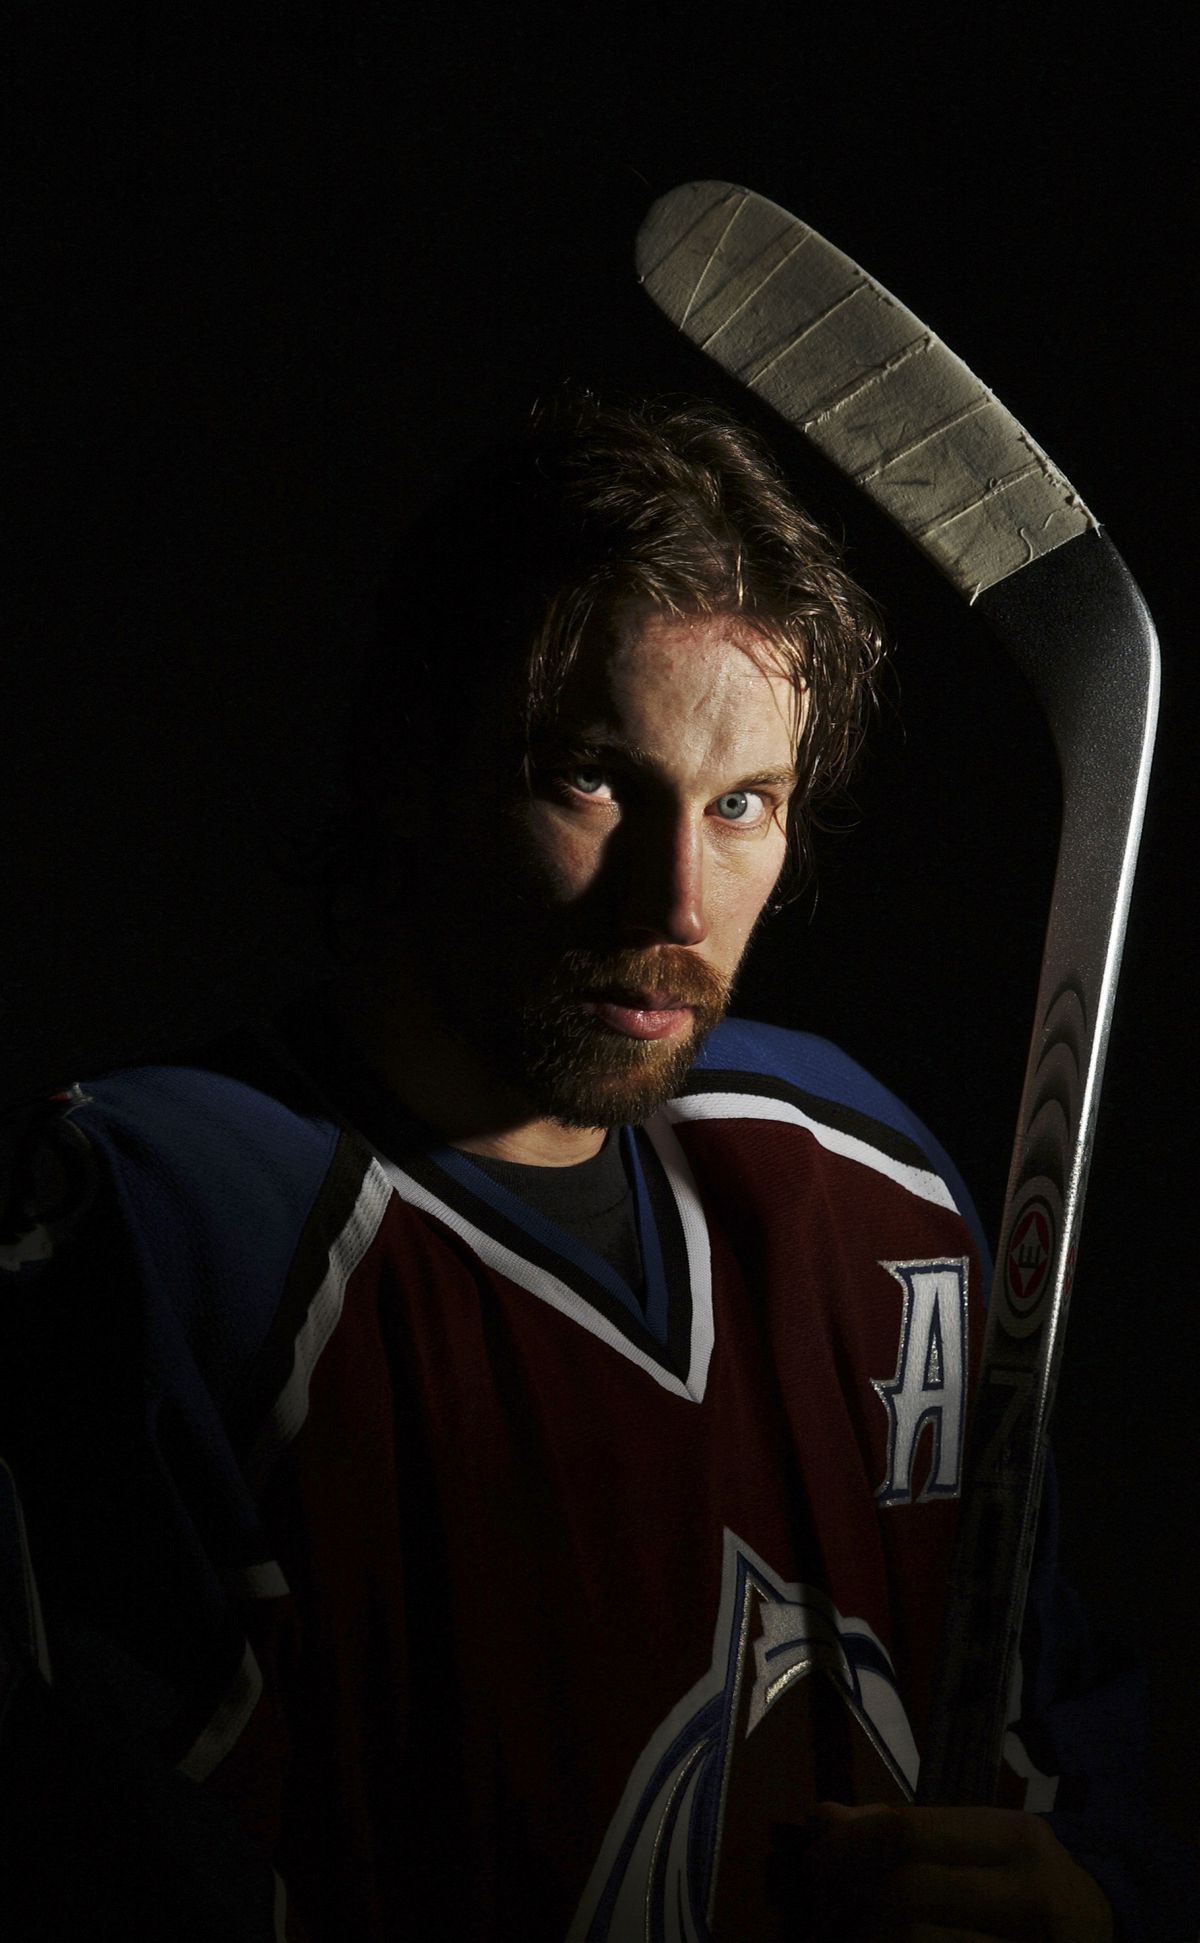 DENVER, COLORADO, APRIL 3, 2004—Colorado Avalanche center Peter Forsberg poses for a portrait for use on the cover of the 2004 Avalanche Playoff Preview section. (DENVER POST STAFF PHOTO BY GLENN ASAKAWA)